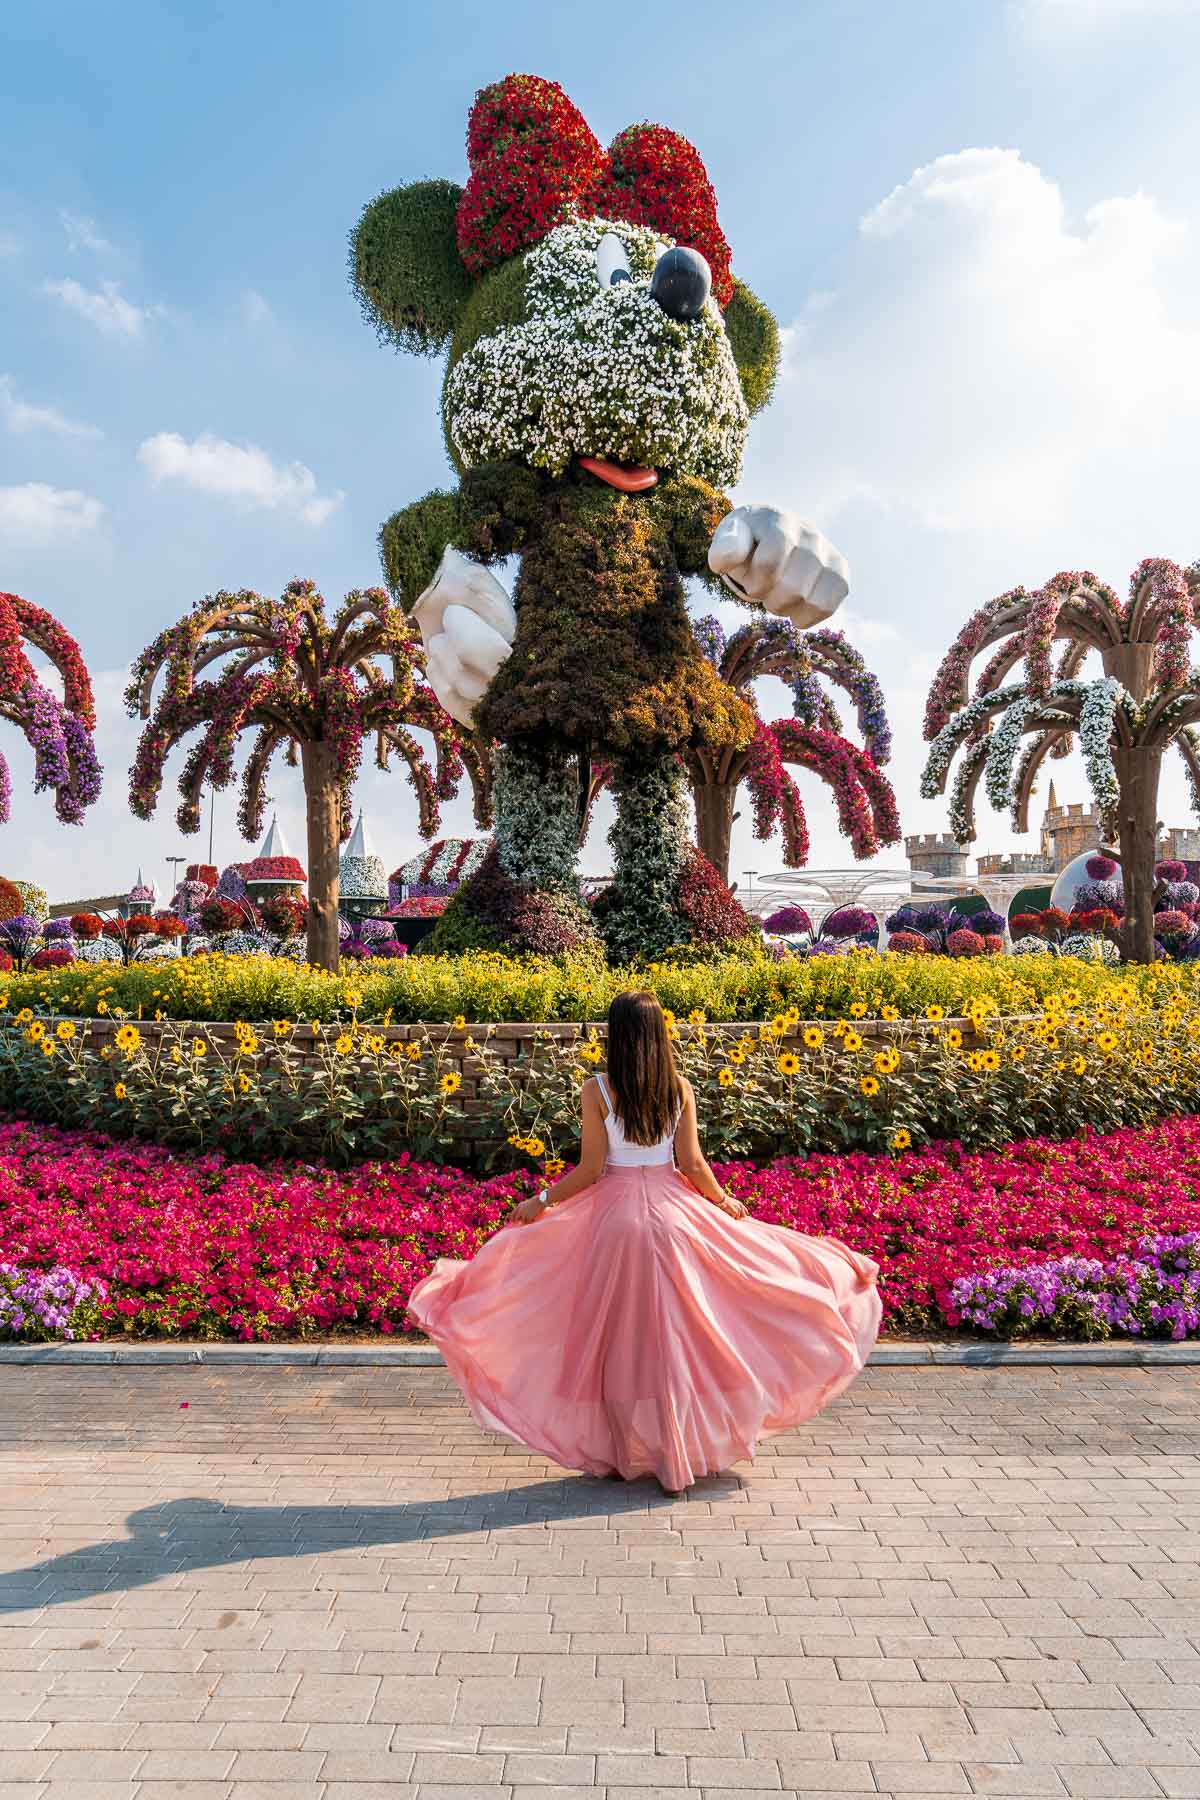 Girl in a pink flowy skirt standing in front of a huge Minnie statue made of flowers in the Dubai Miracle Garden